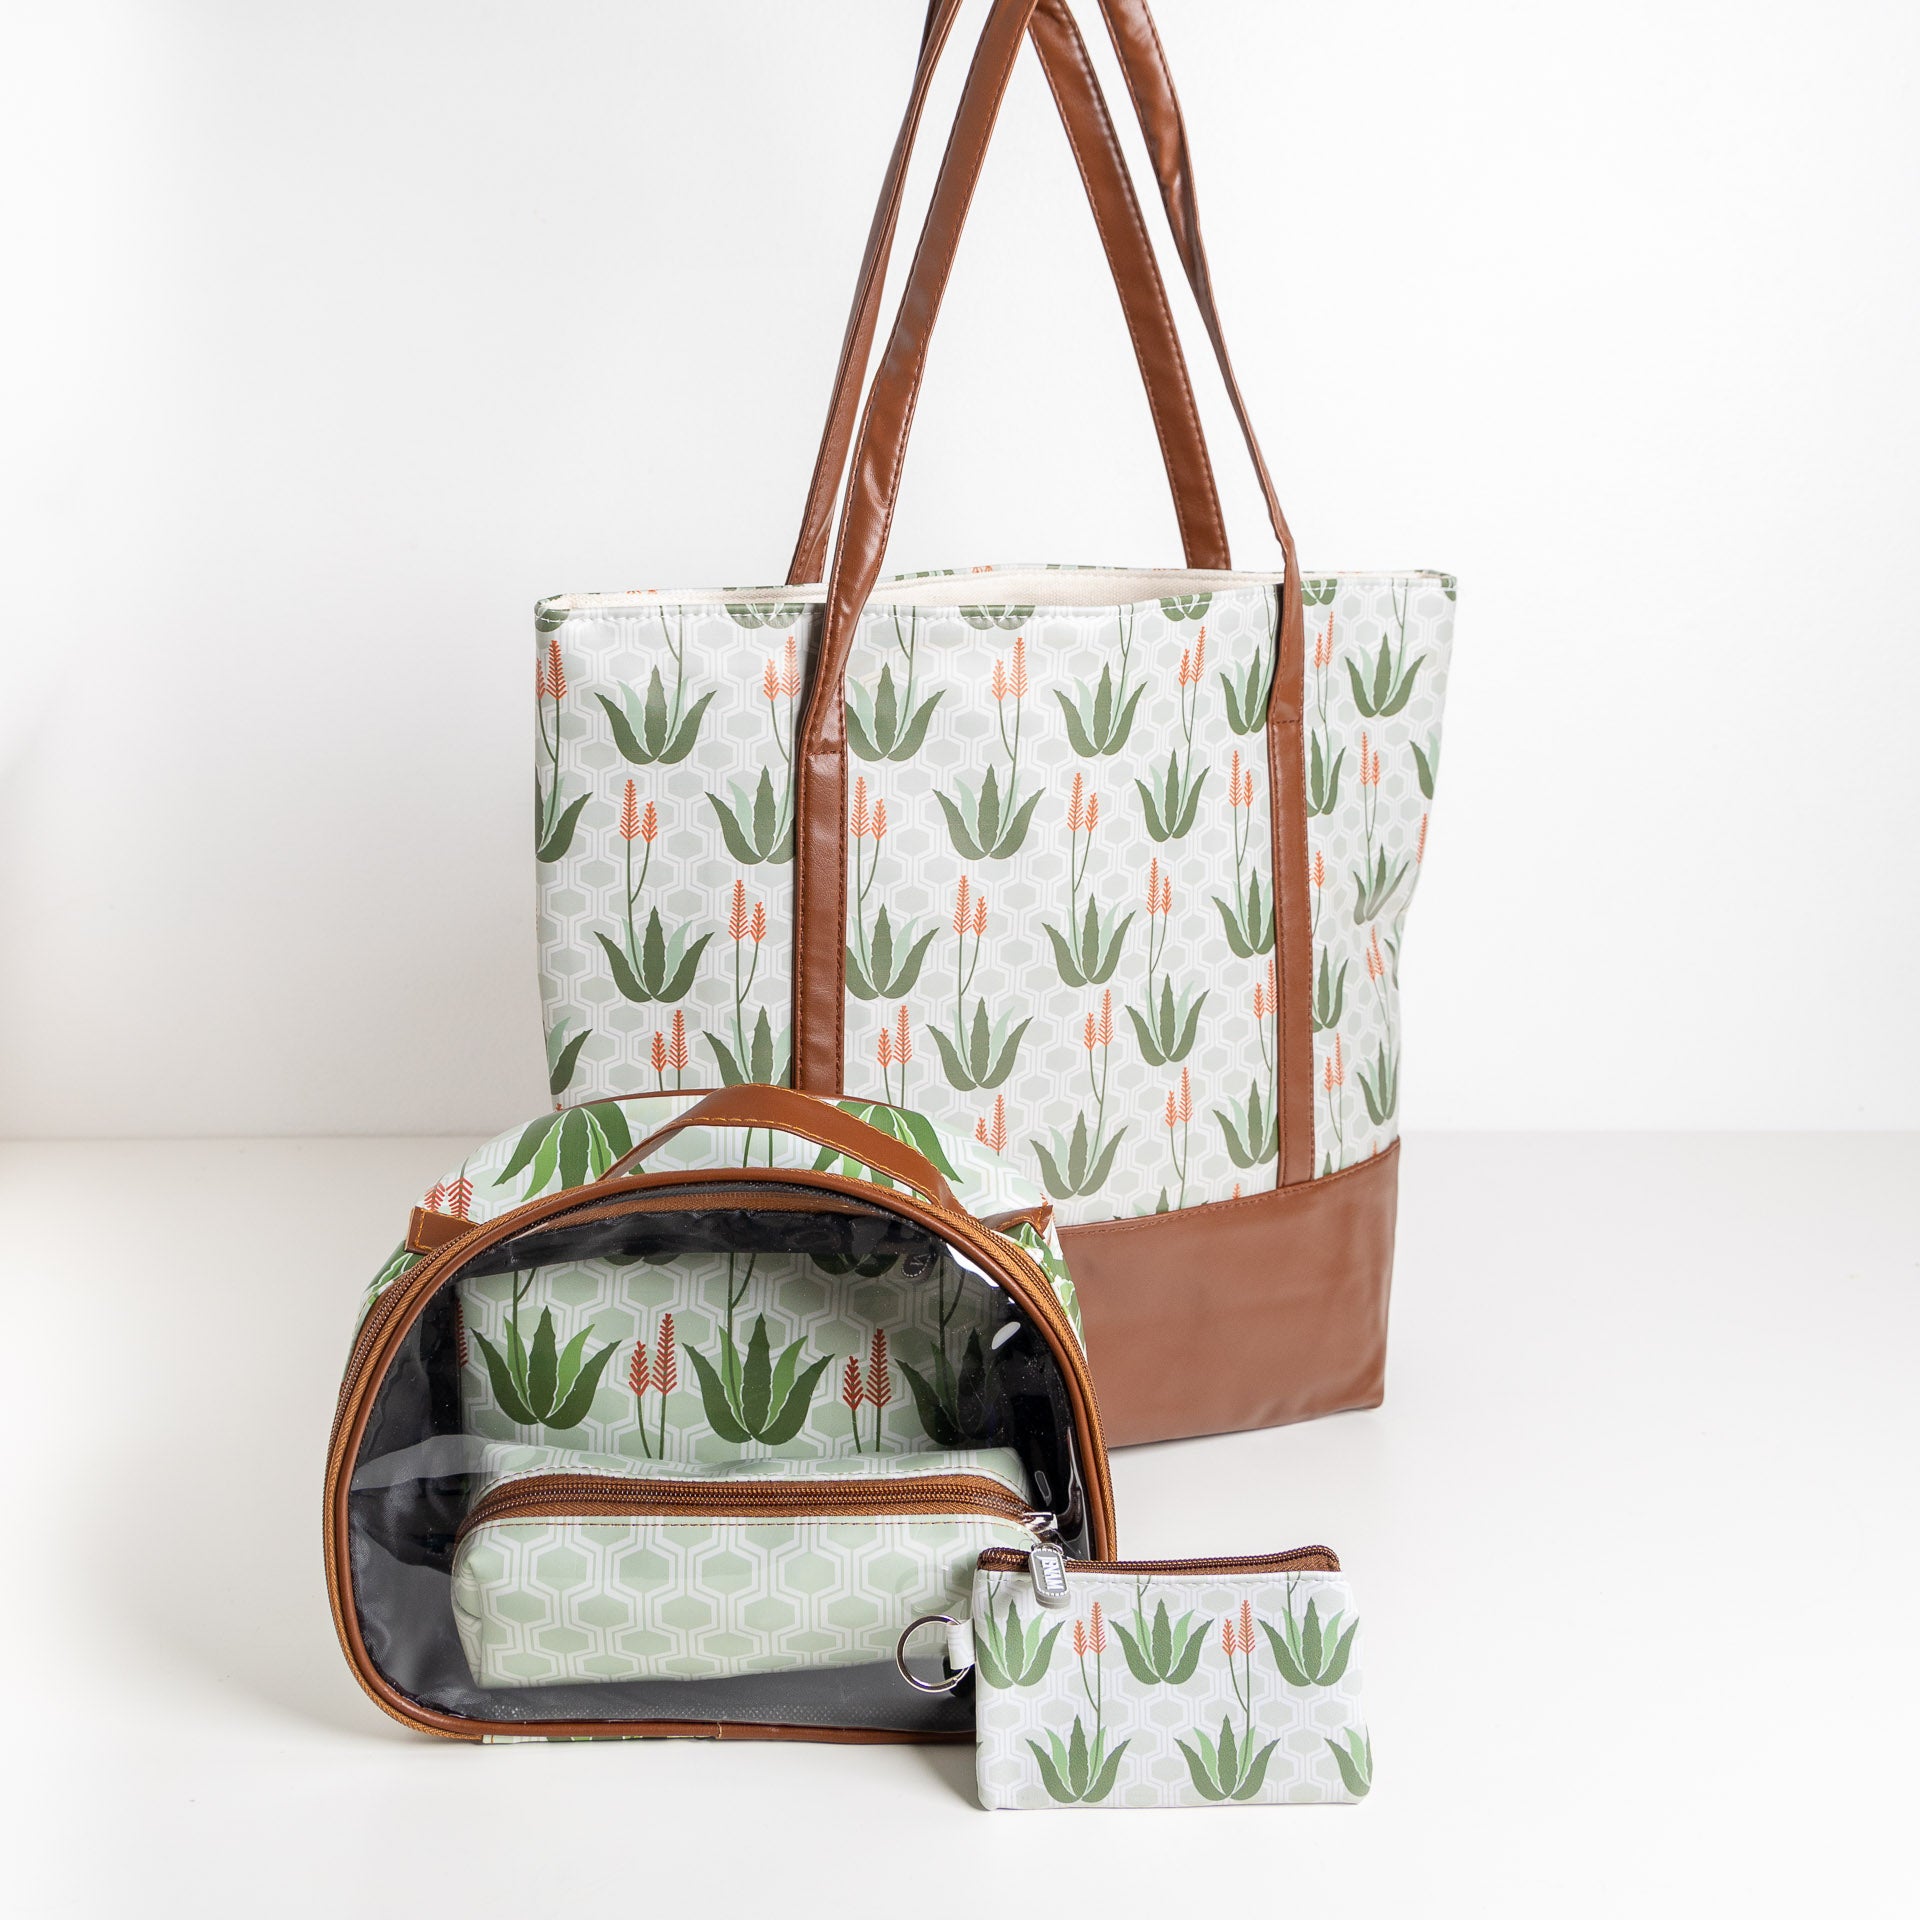 Out of Africa - Aloe Print Bags & Accessories (assorted styles)